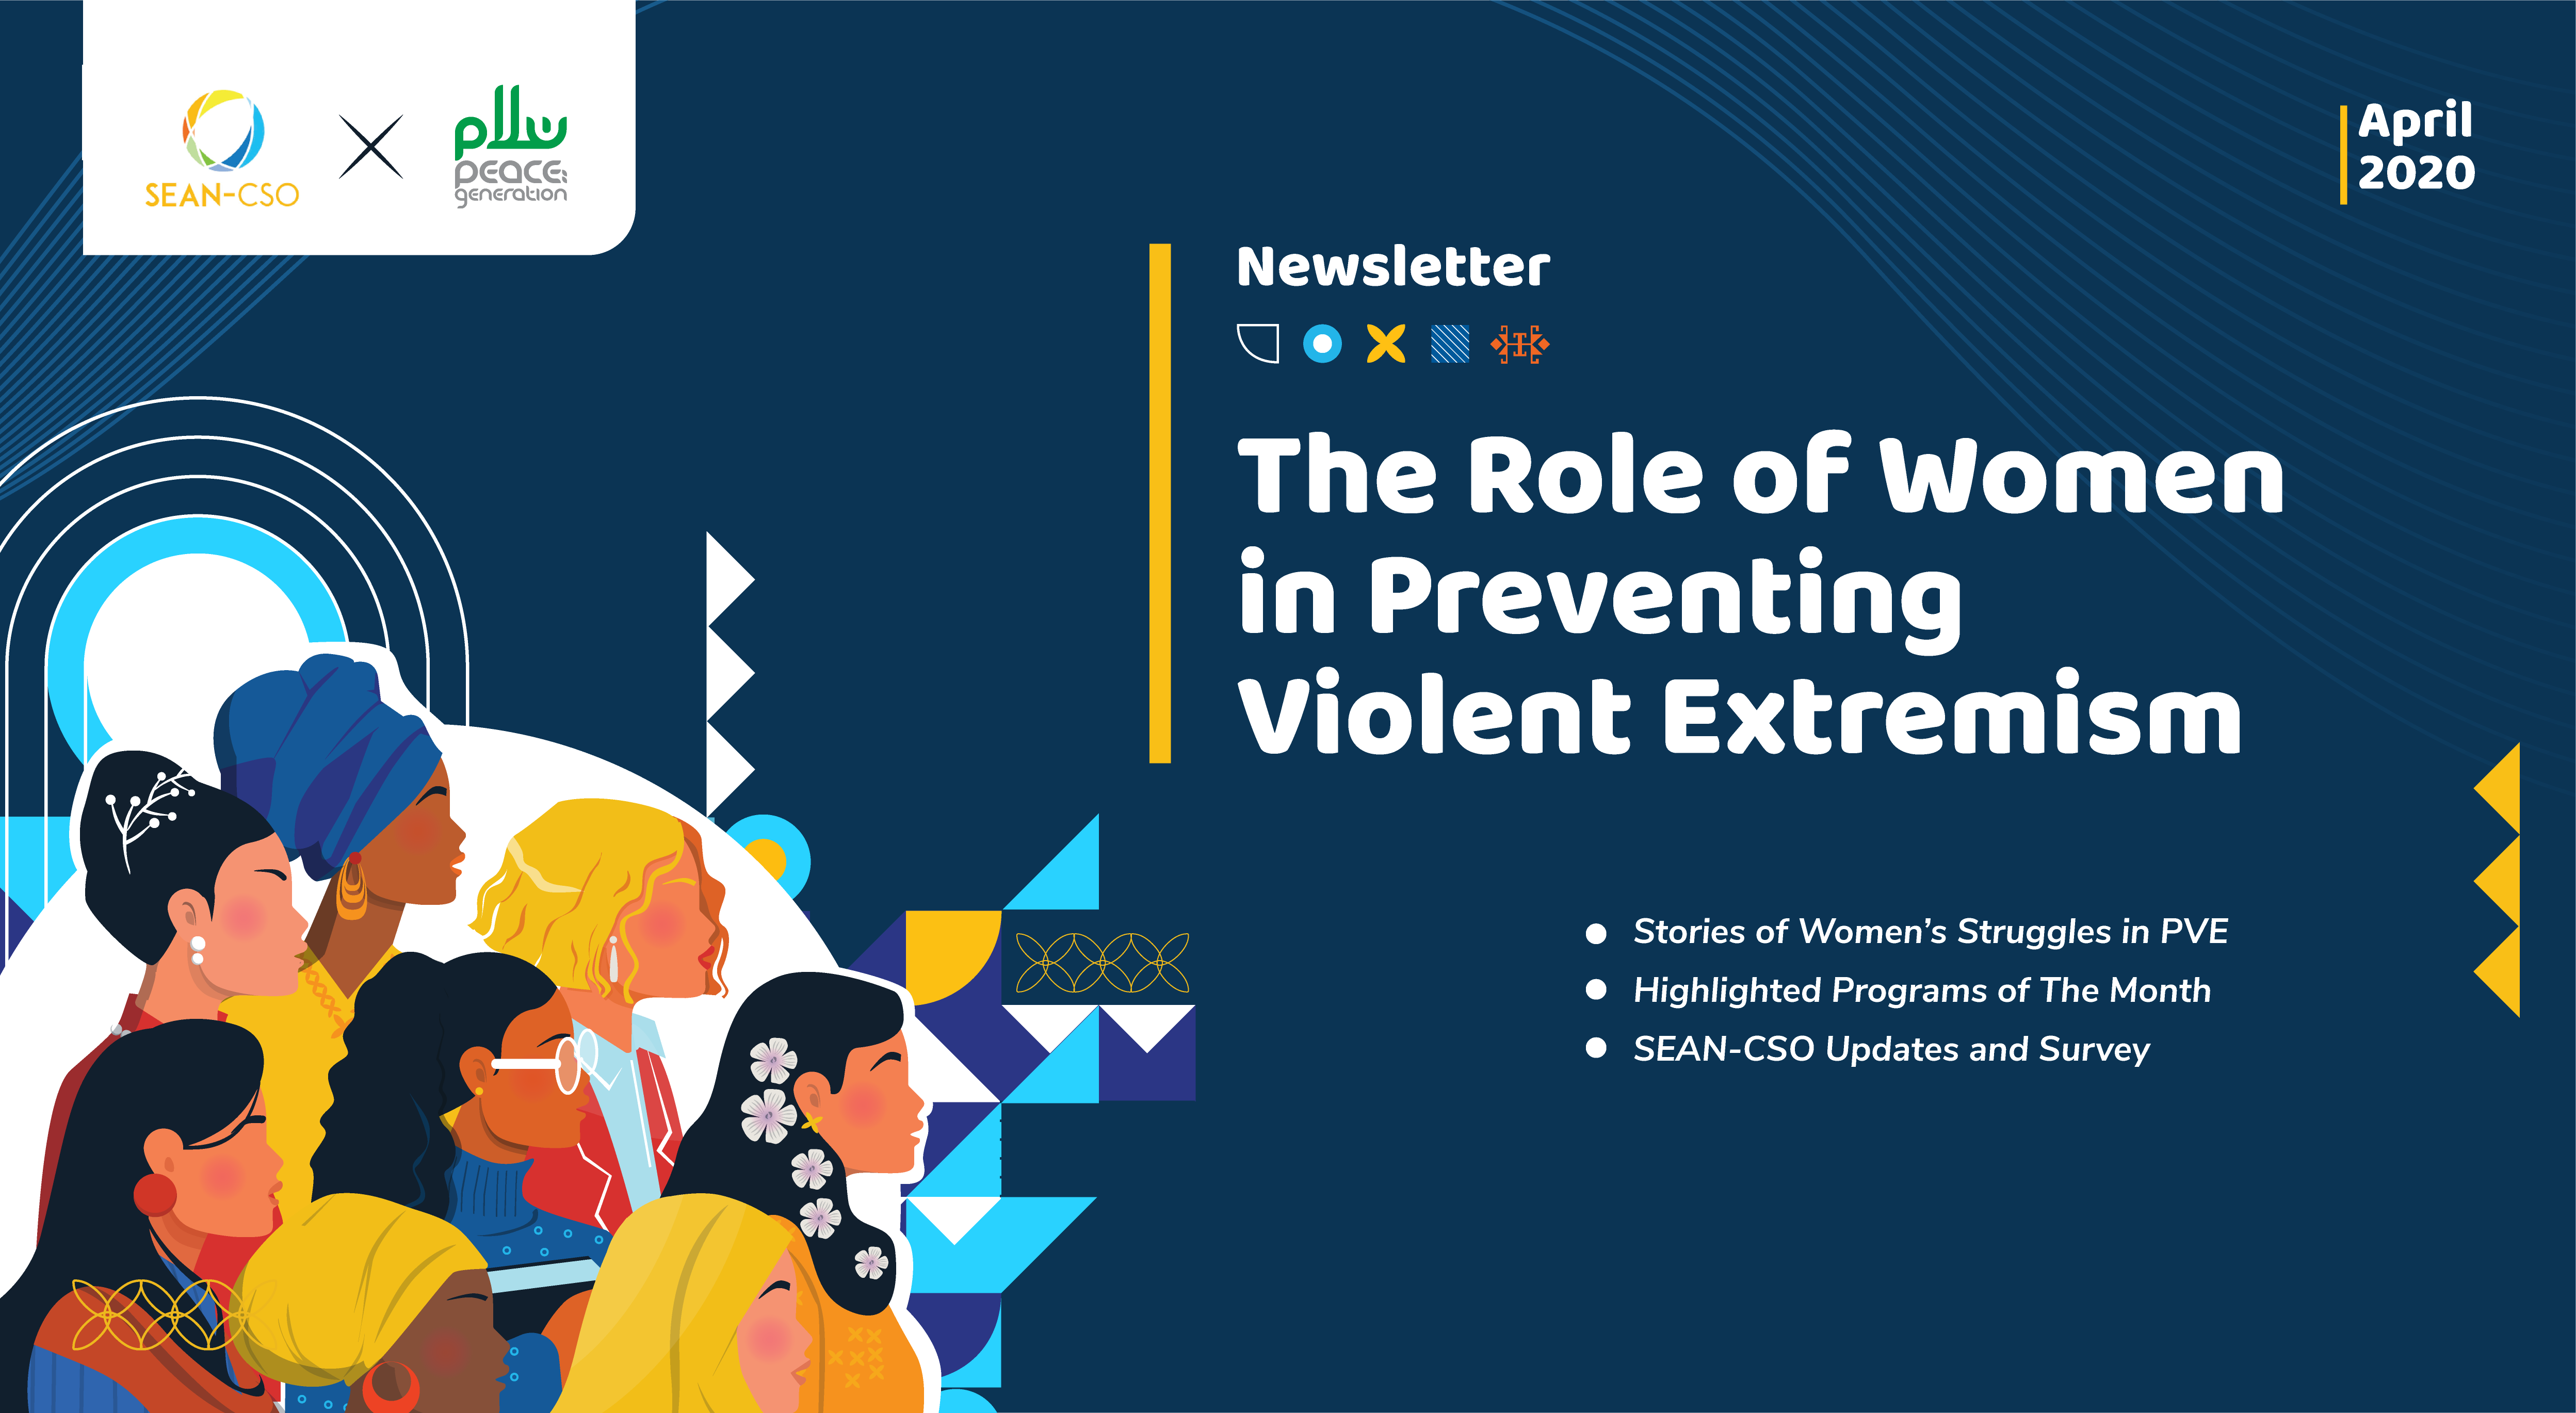 [Newsletter] April 2020: The Role of Women in Preventing Violent Extremism